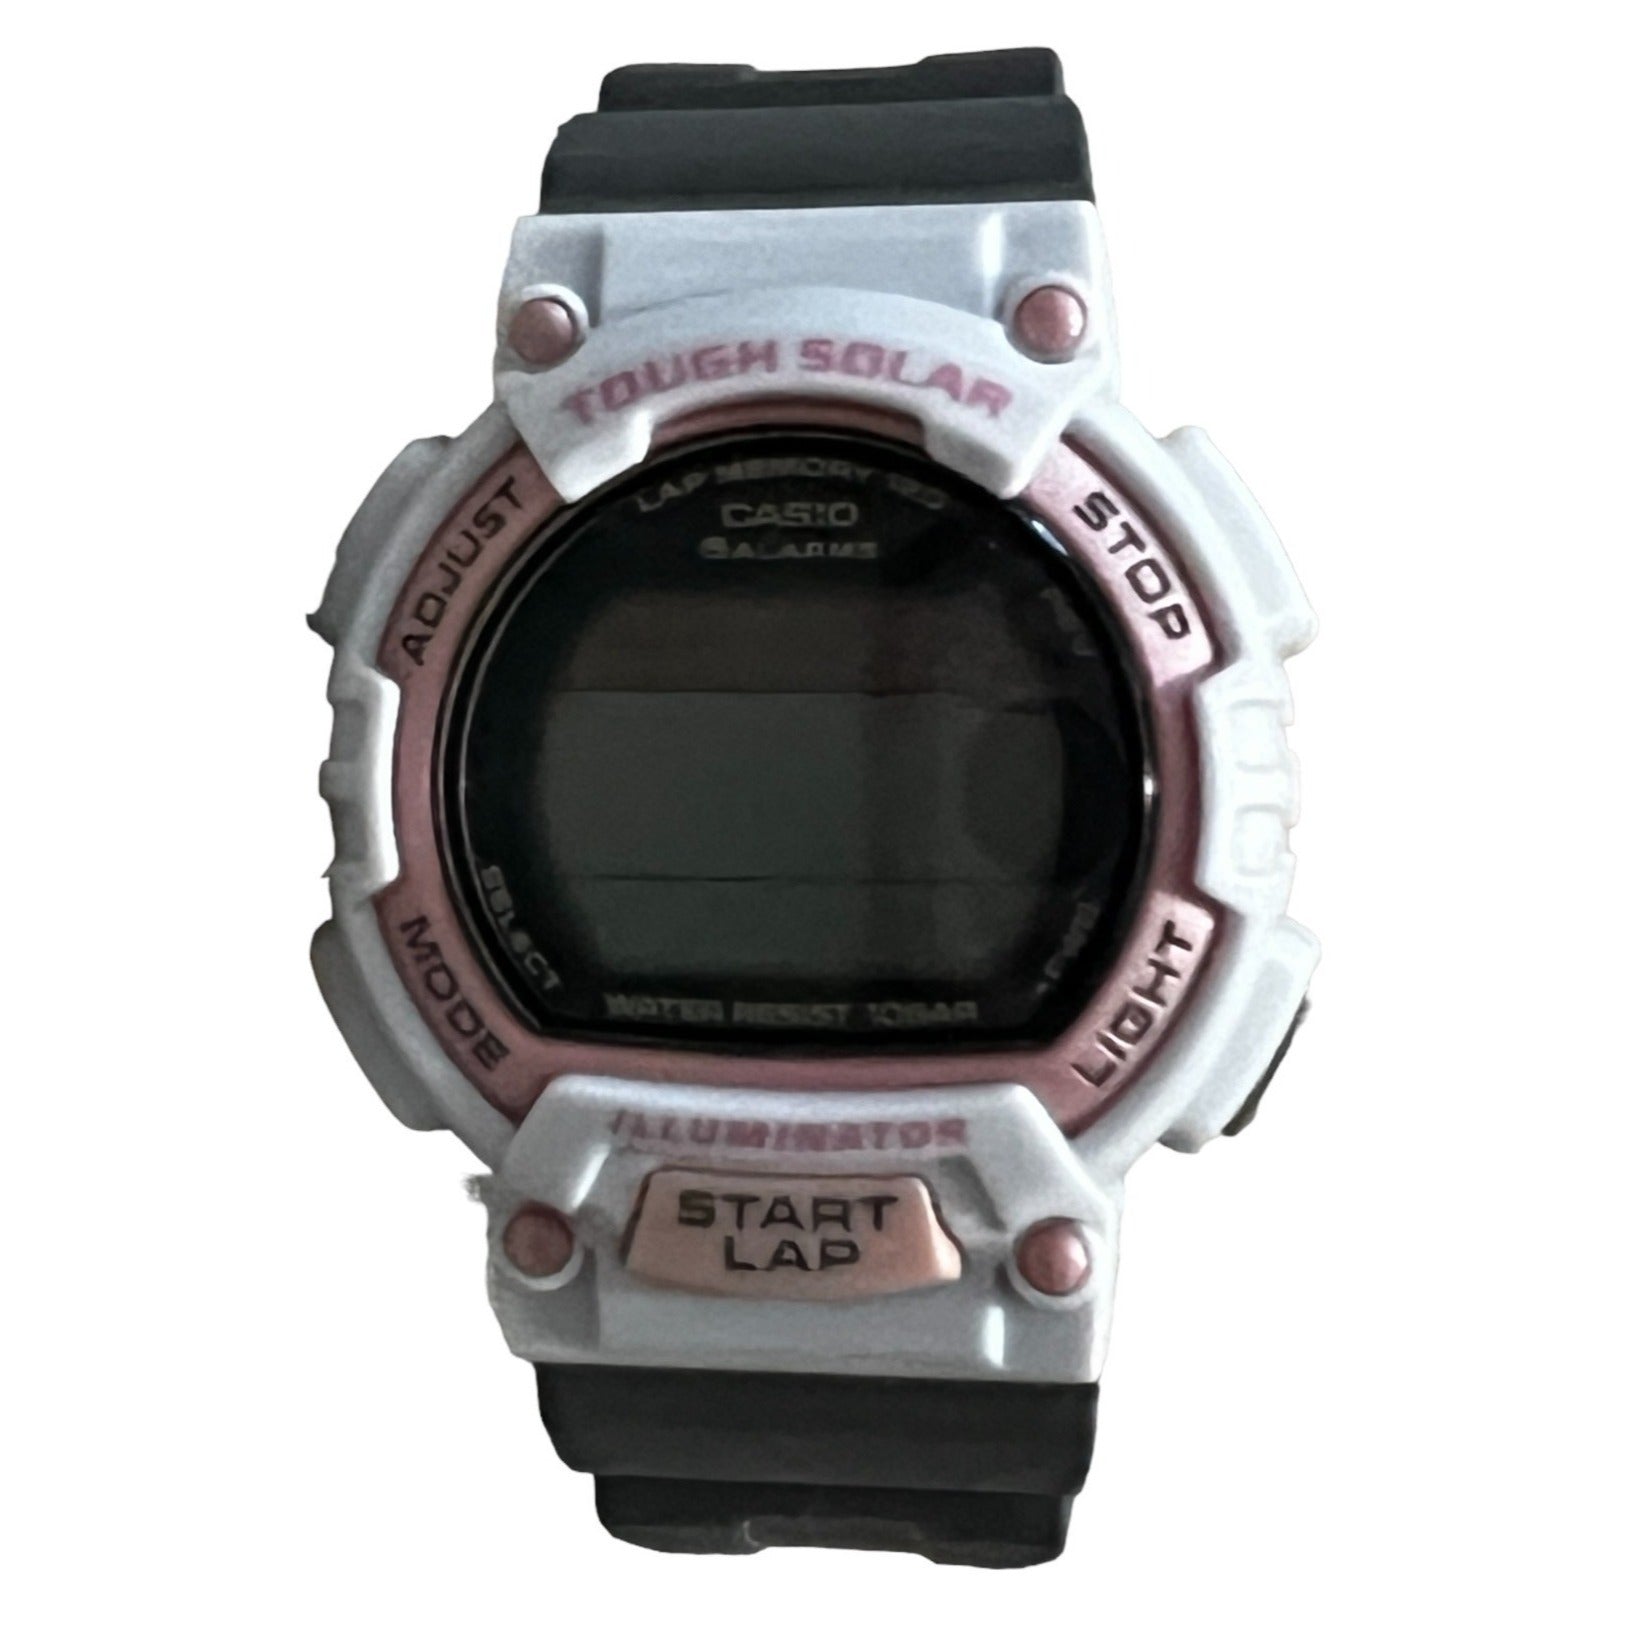 Casio STL-S300H Pink & Gray Fitness Tracker Watch Water Resistant